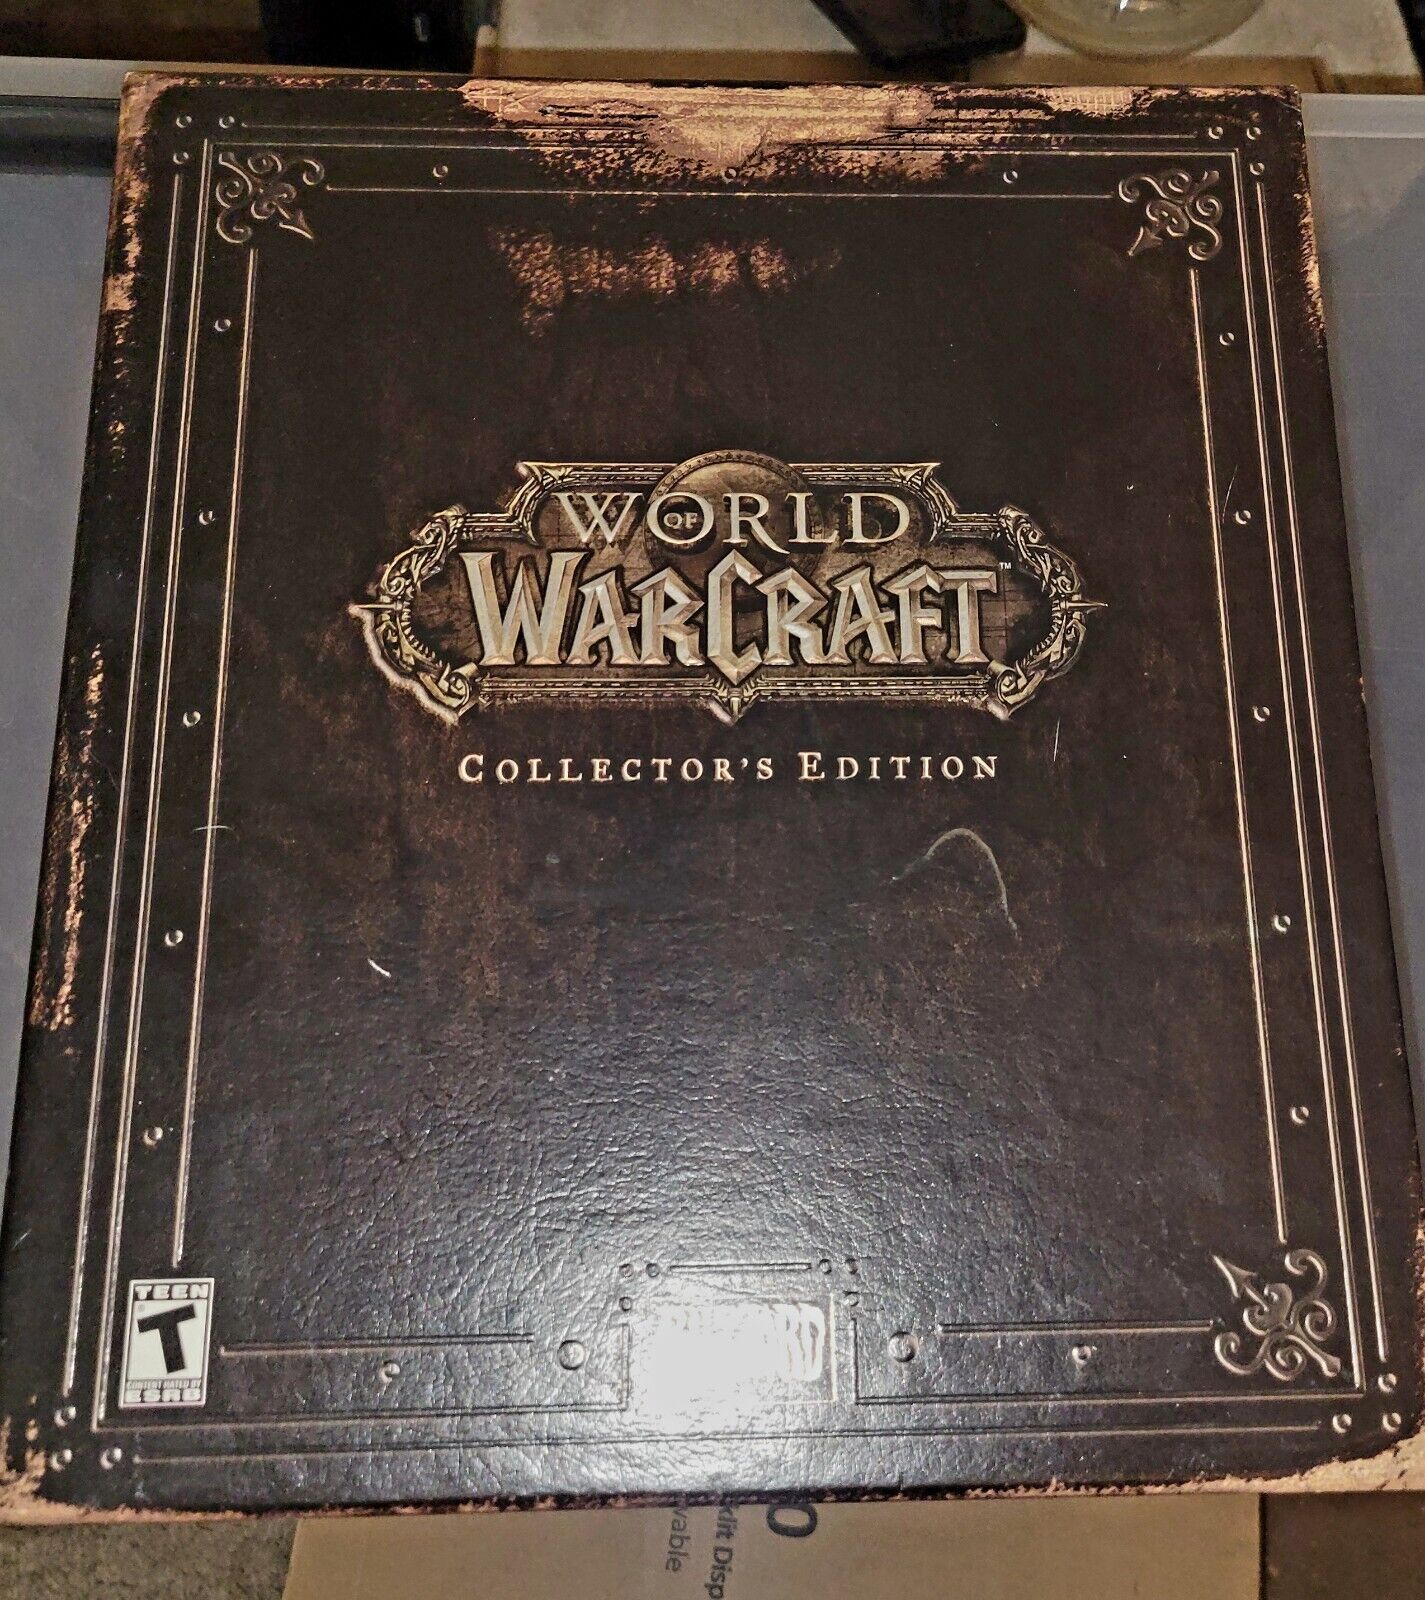 World of Warcraft Vanilla Collector's Edition (PC, 2004) Boxed Set